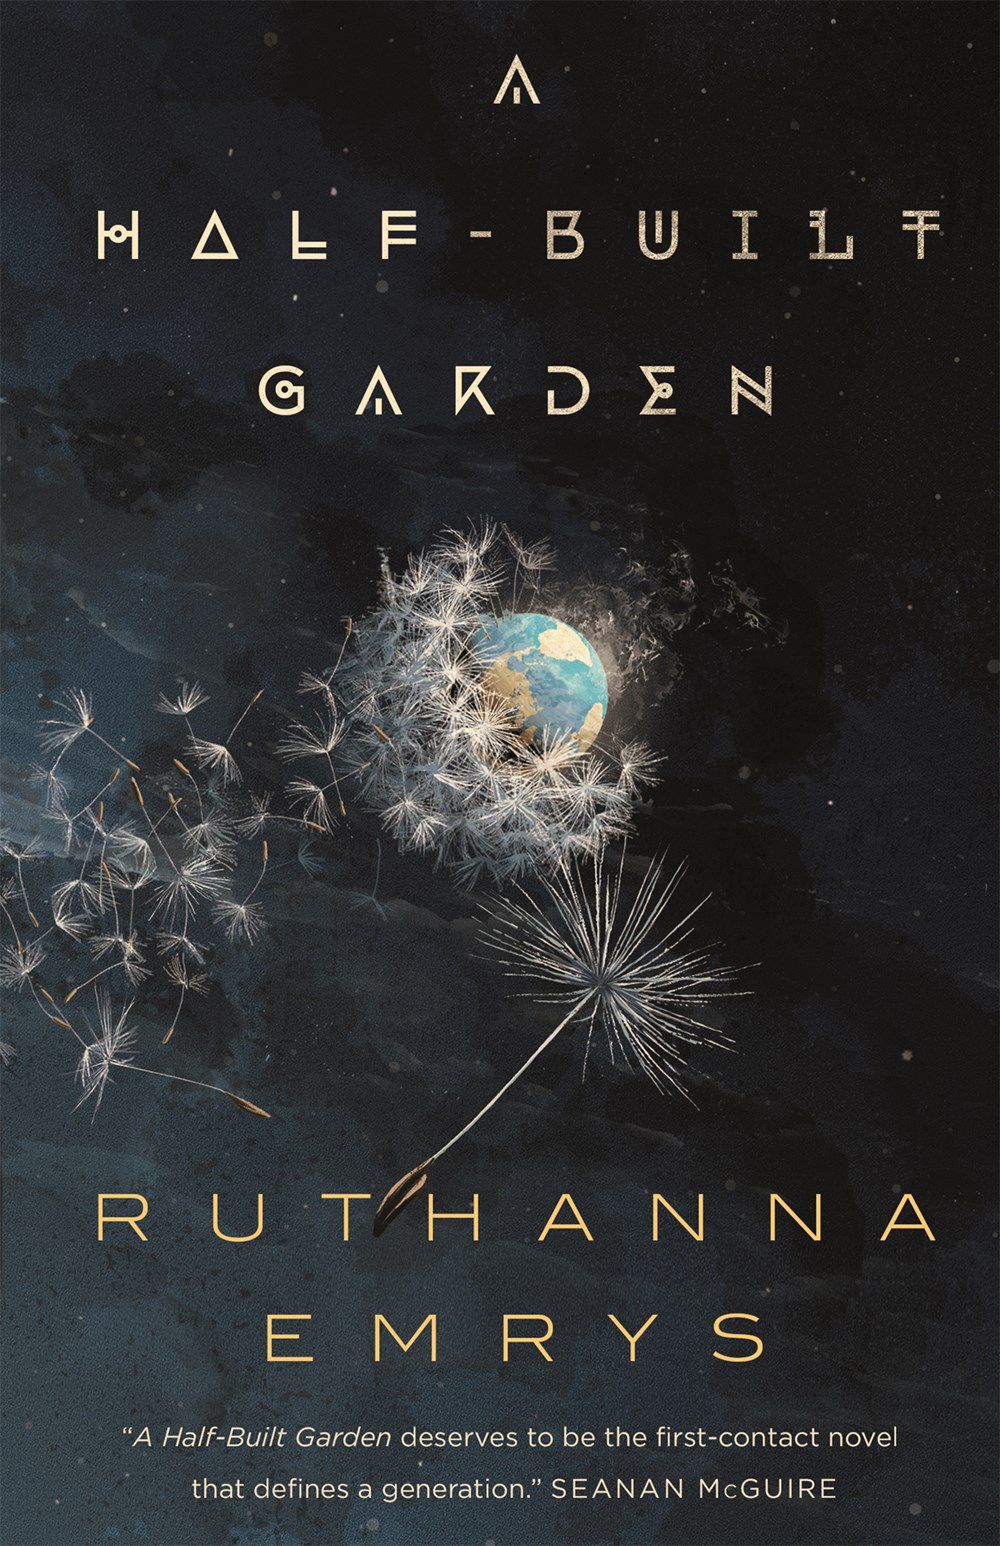 Cover photo for A Half-Built Garden, showing the earth at a distance surrounded by dandelion seed heads.